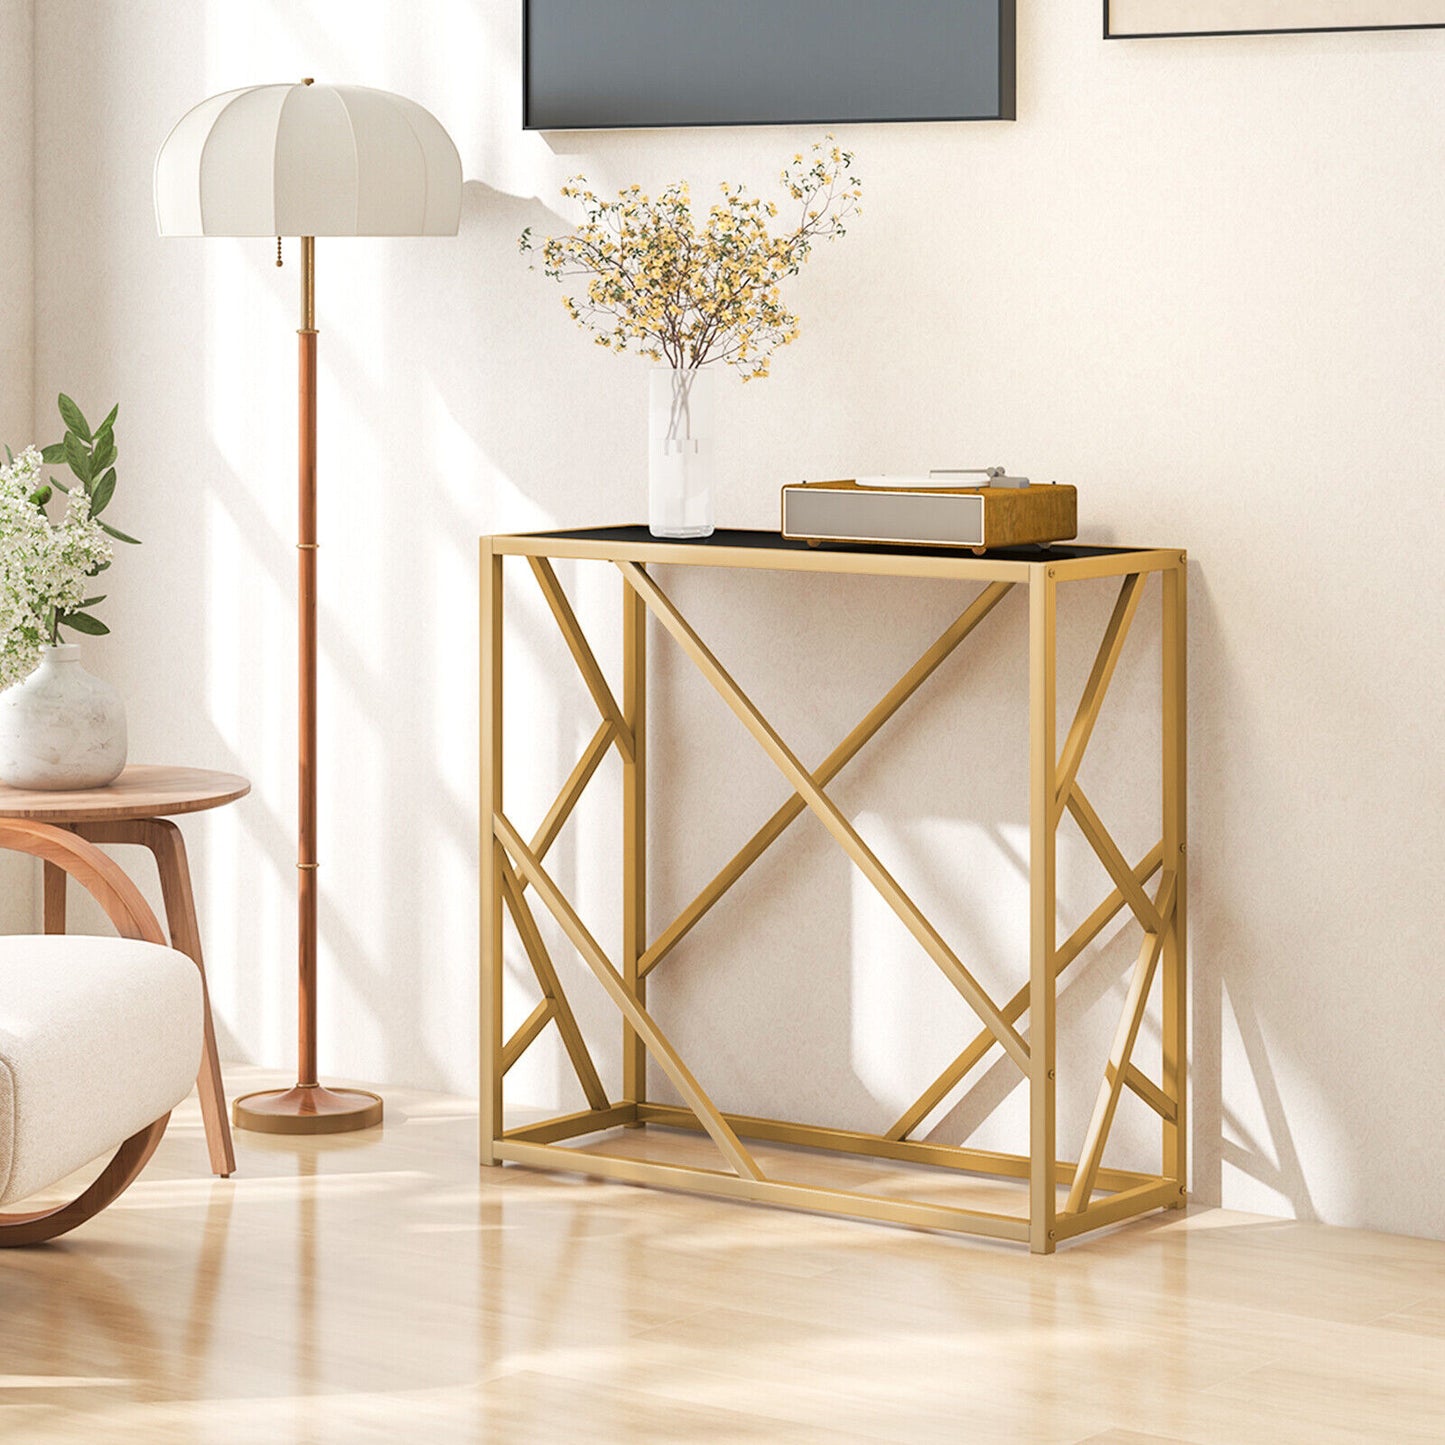 80cm Gold Console Table Modern Narrow Accent Display Entryway Table Hallway